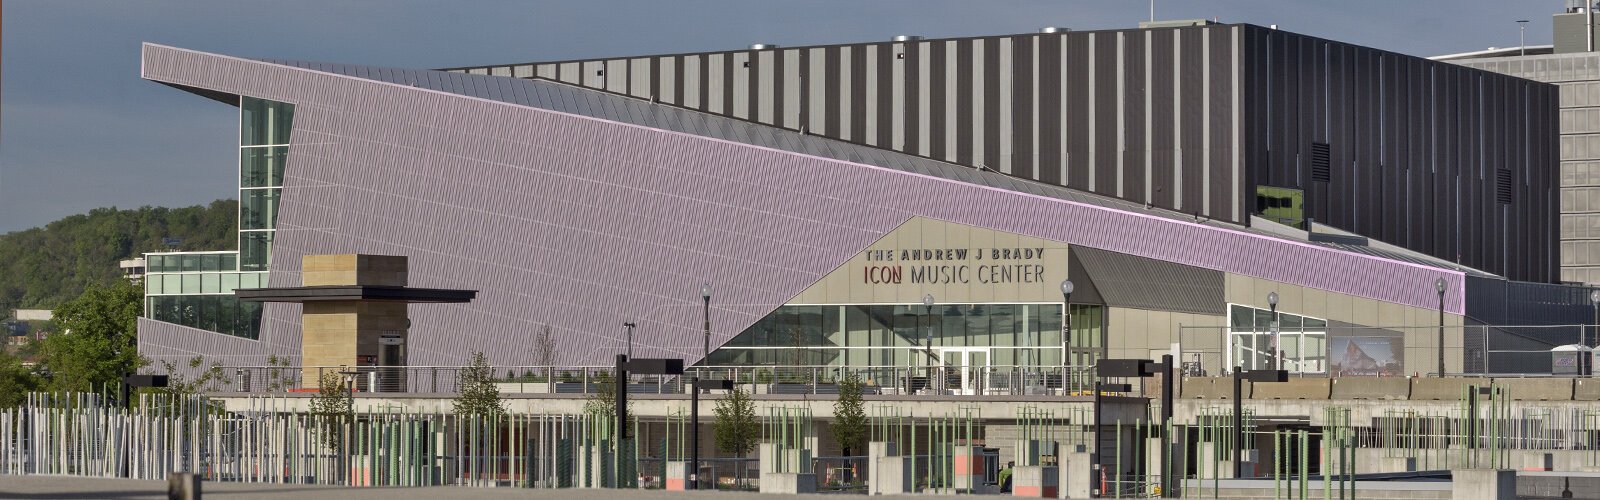 Construction of the The Andrew J Brady ICON Music Center began in February 2020. The venue is now complete but won't have live music until this September.